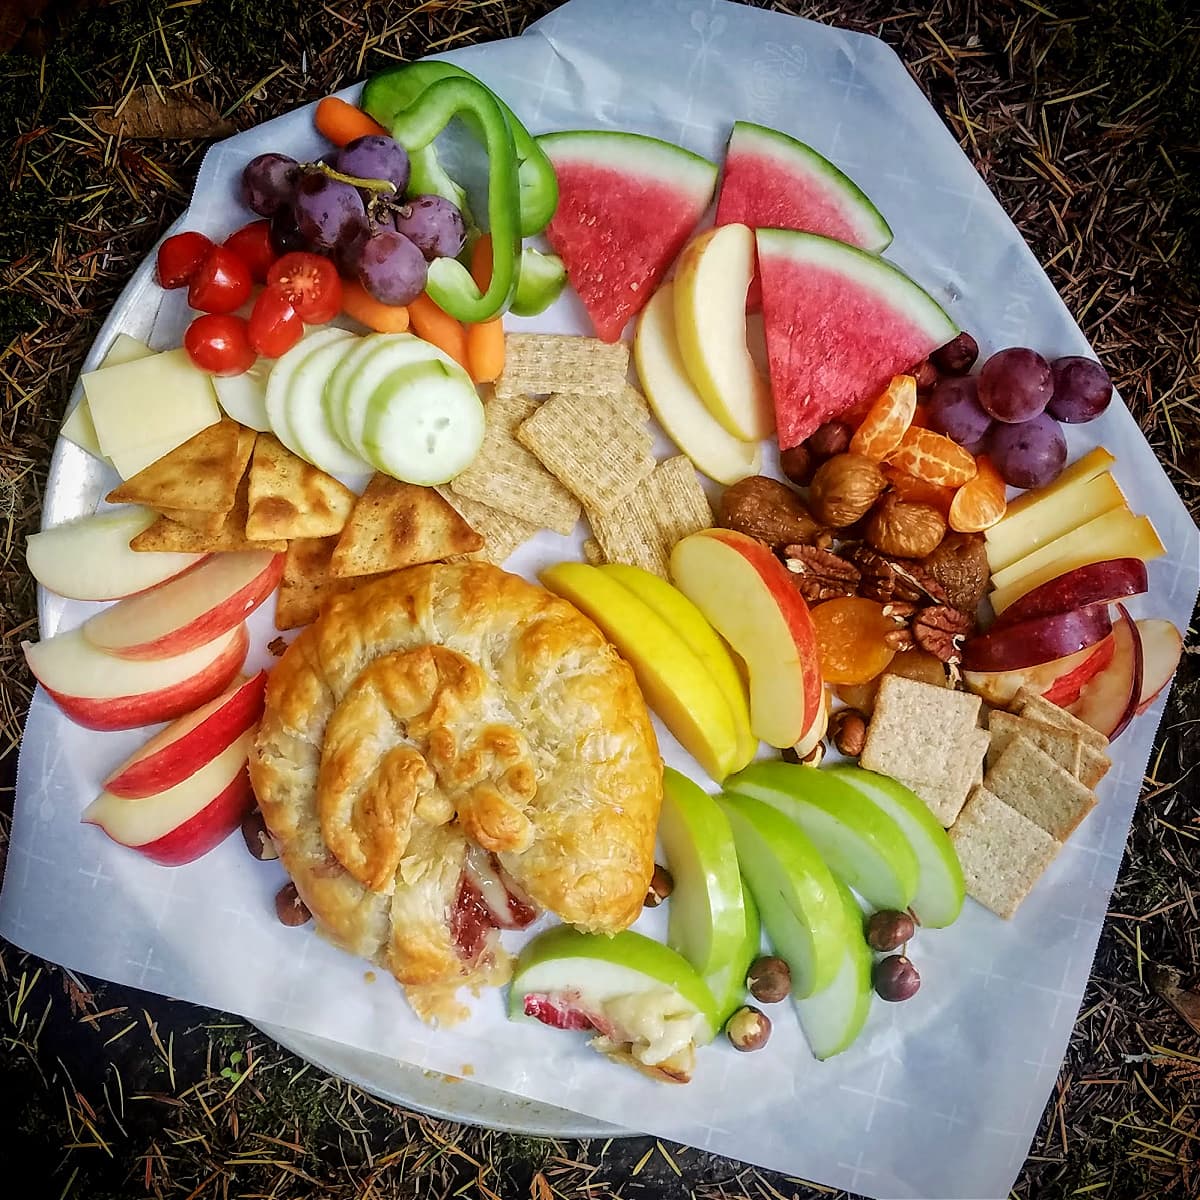 Charcuterie plate of baked brie and various fruits, nuts, and crackers, in a rustic setting.